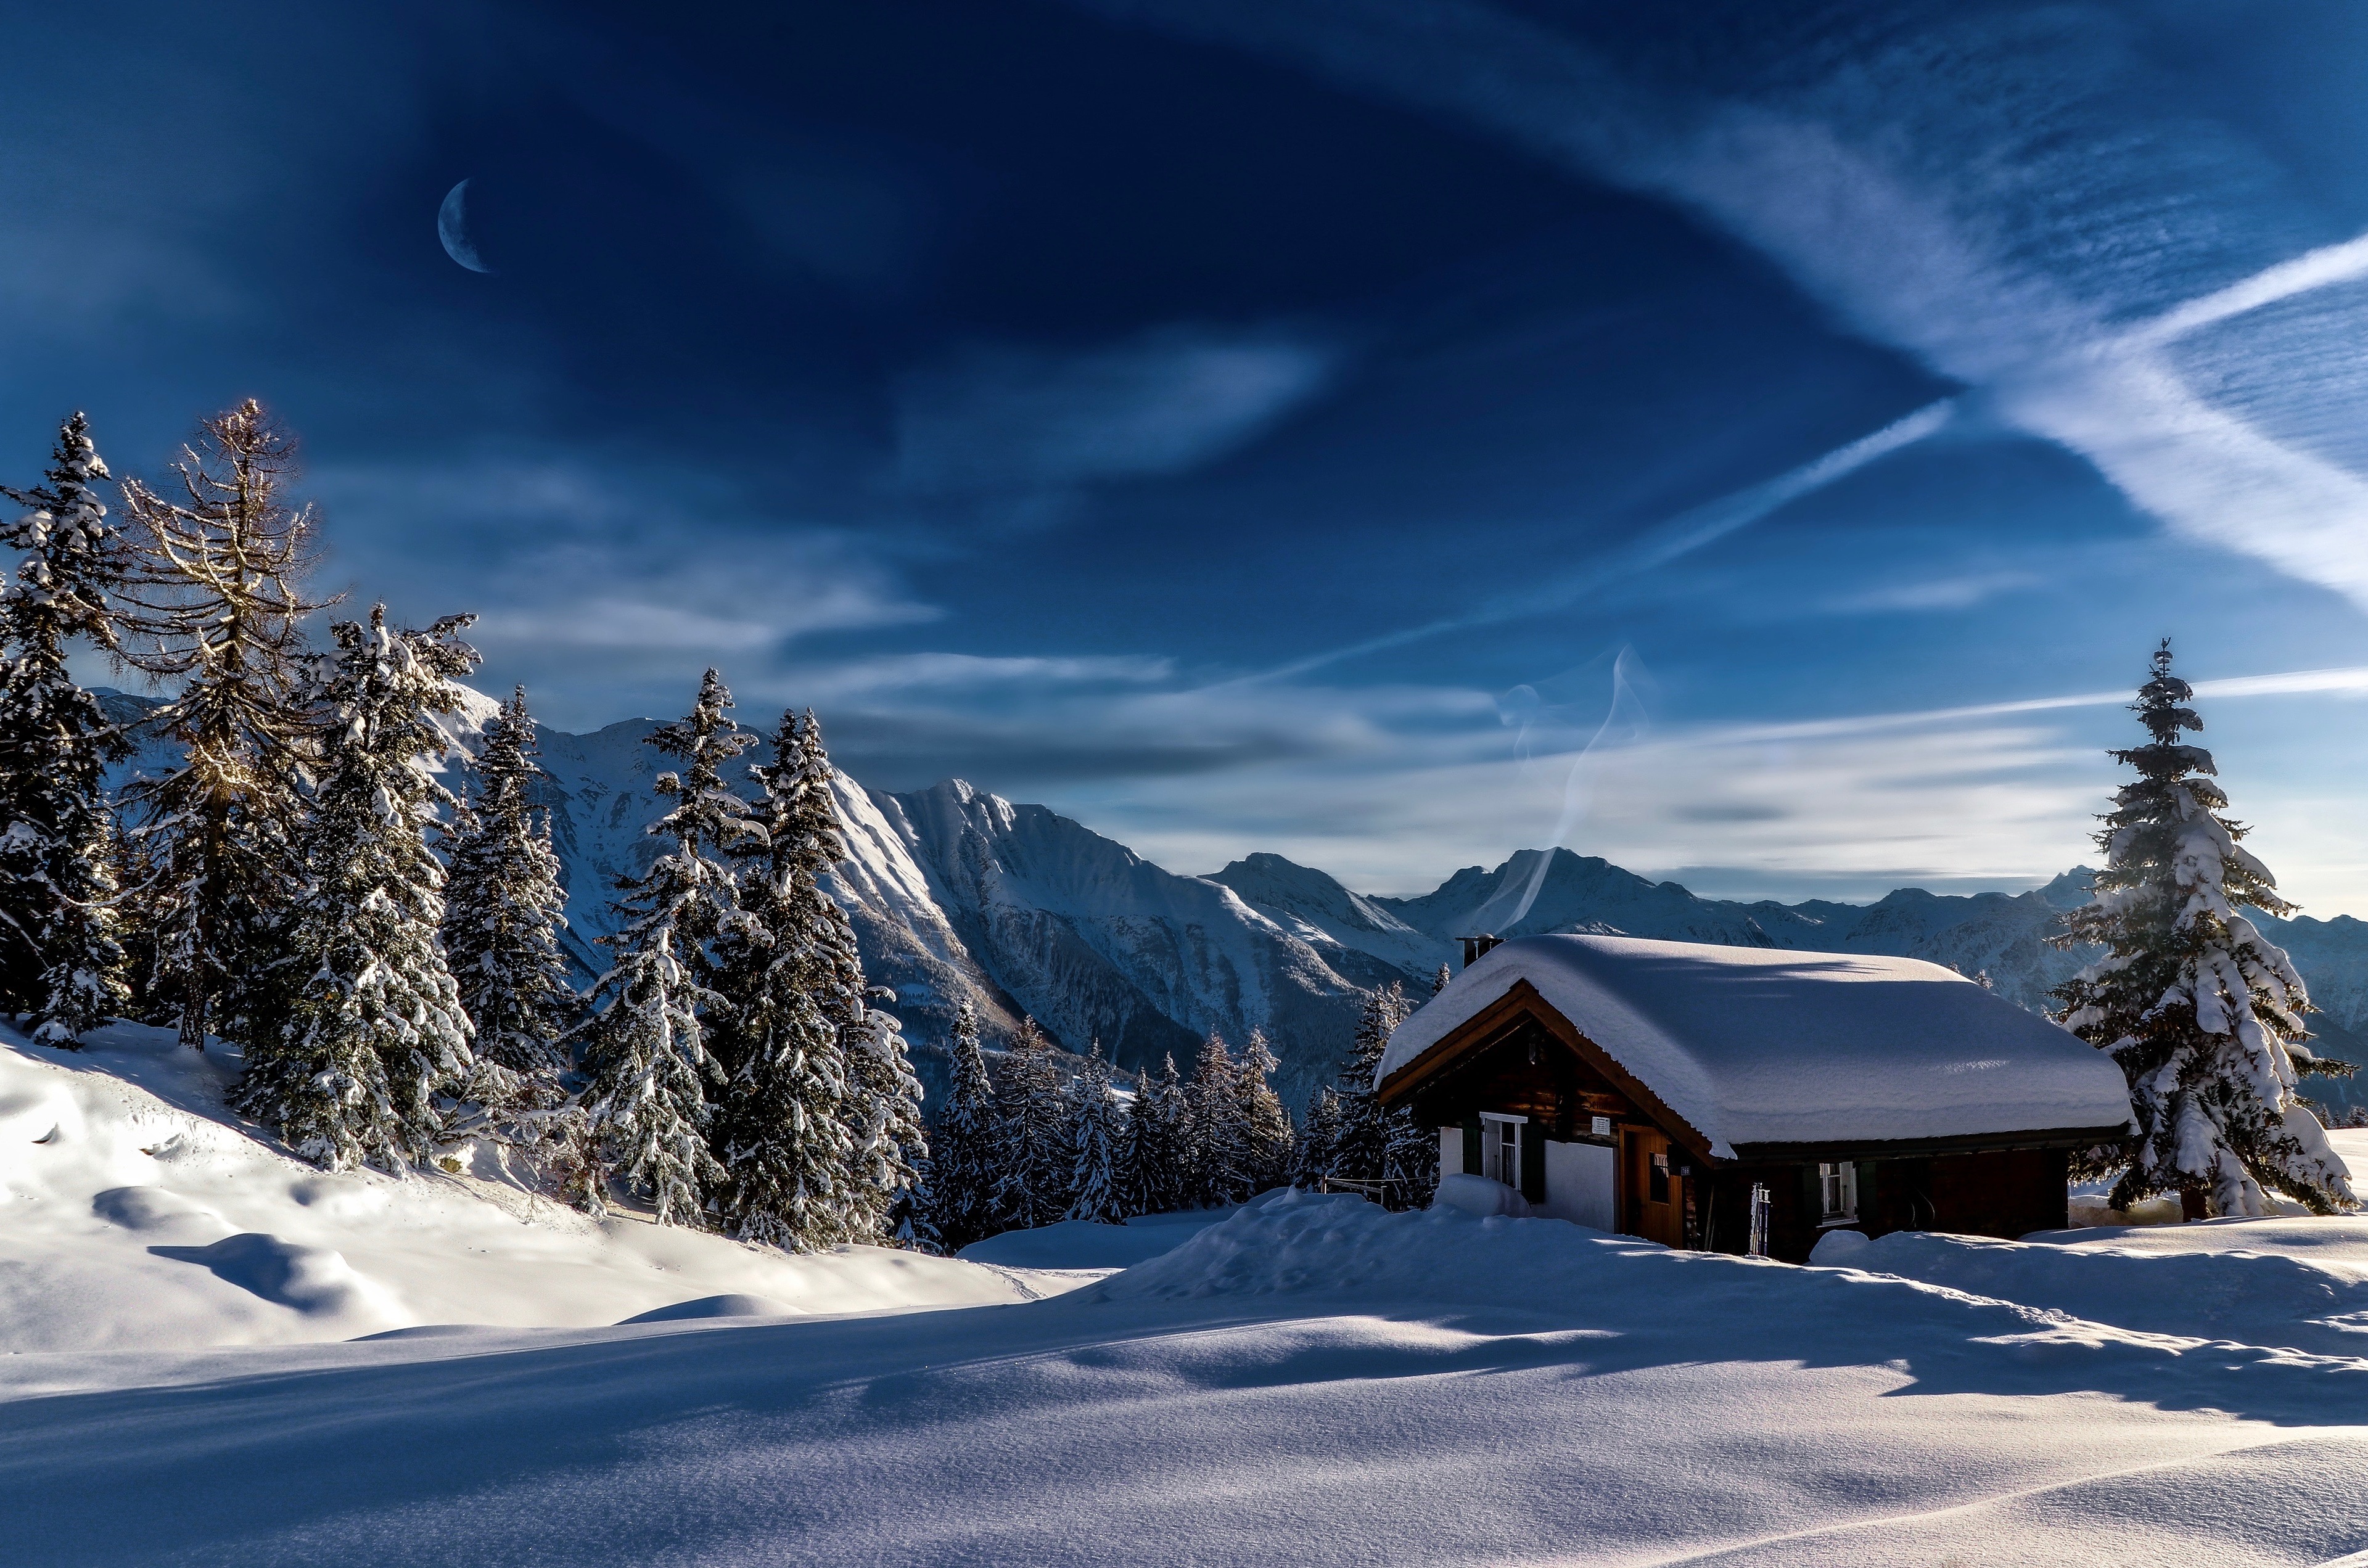 General 3840x2543 nature landscape winter snow sky clouds trees house